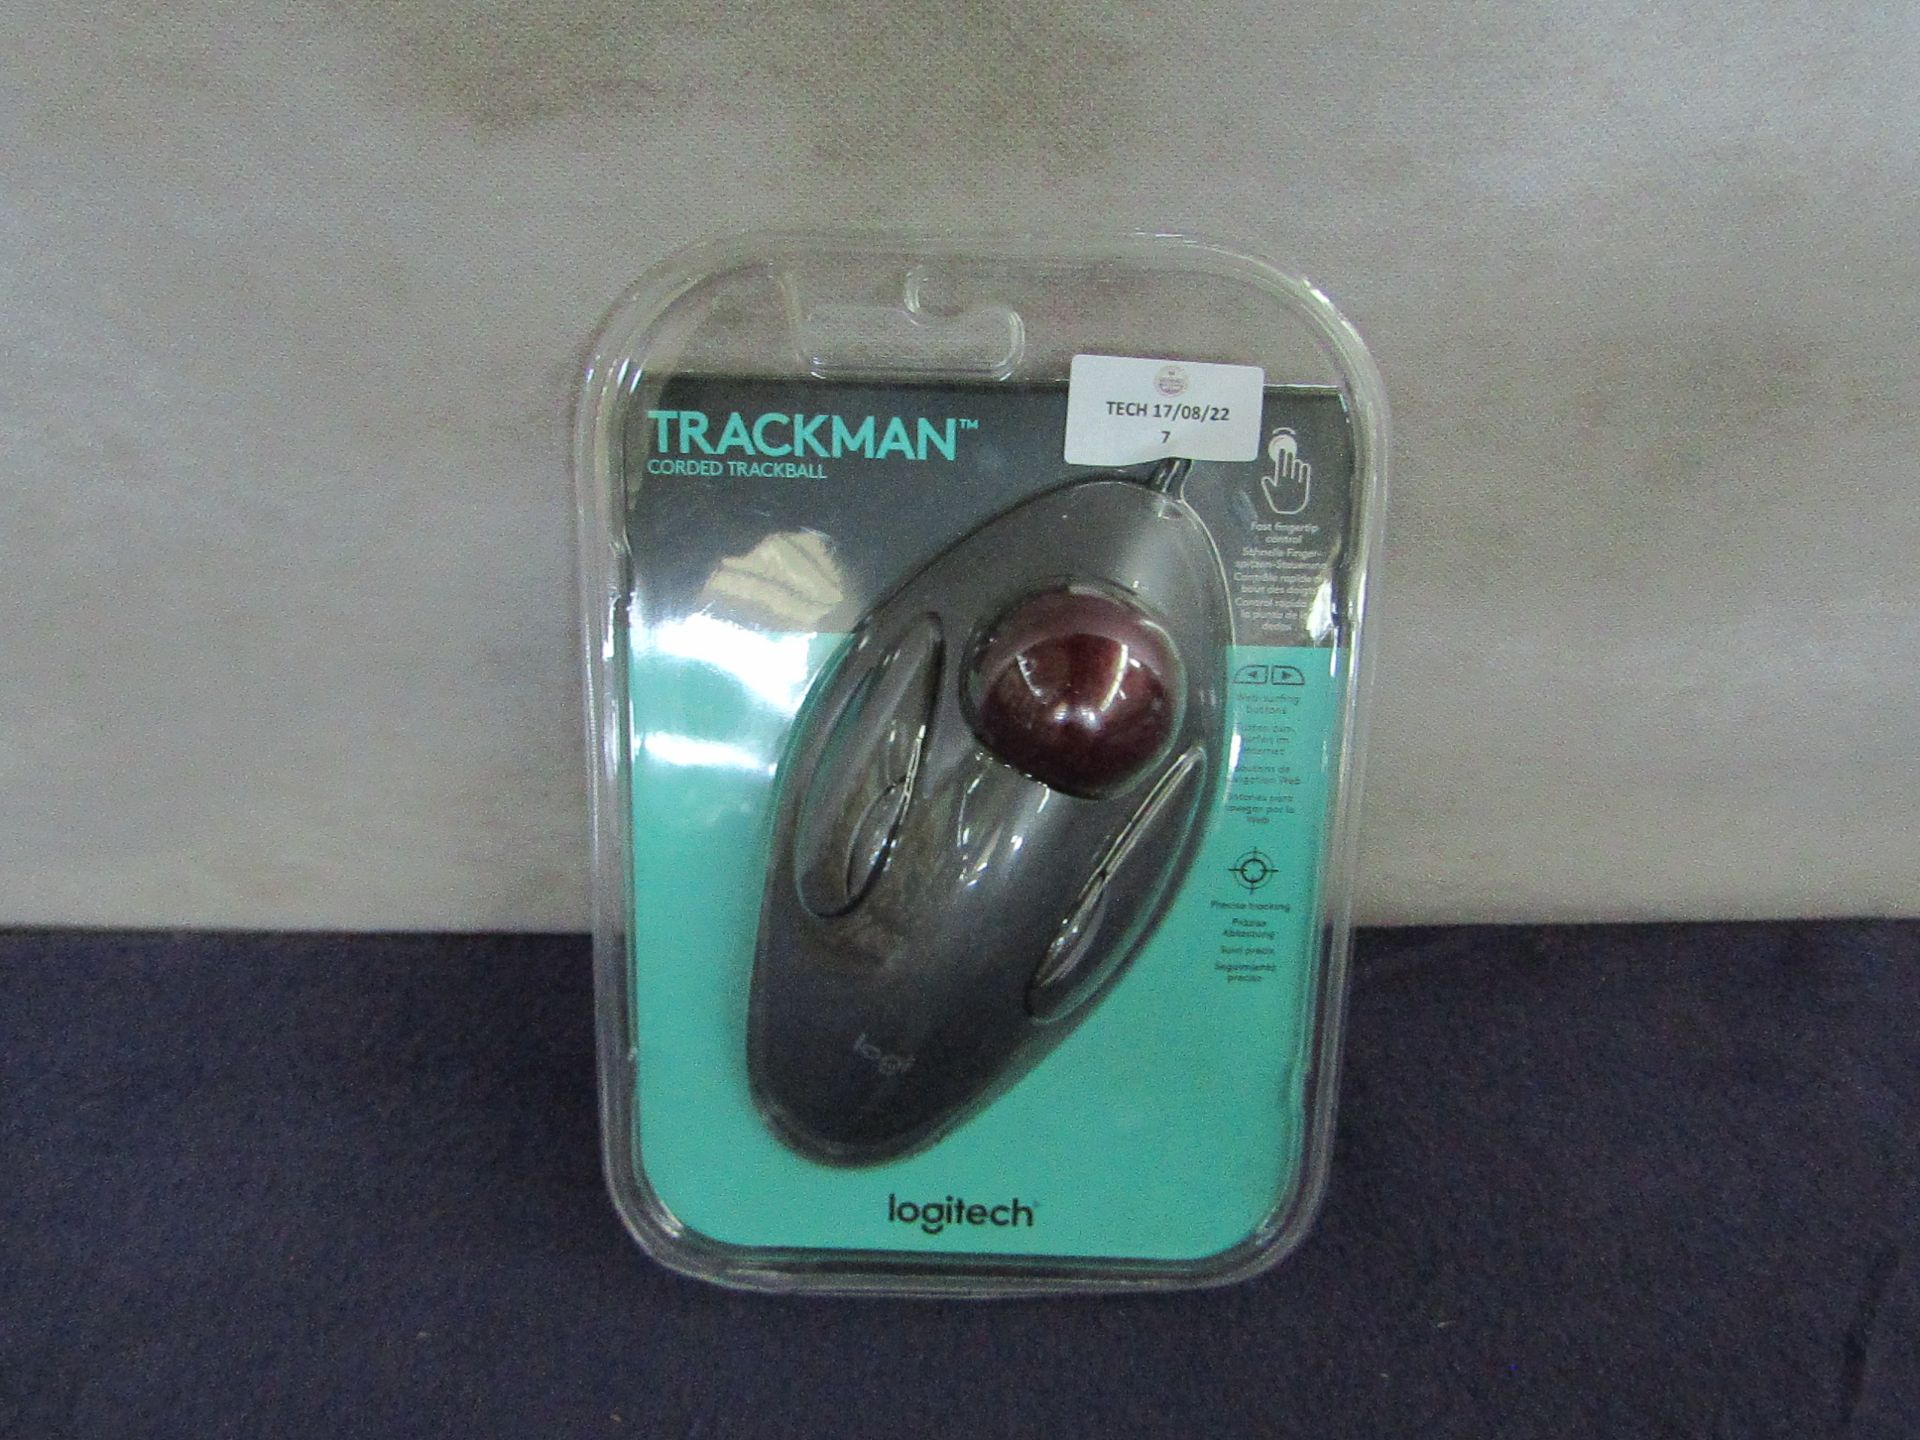 Logitech - Trackman Corded Track Mouse - Untested & Packaged.